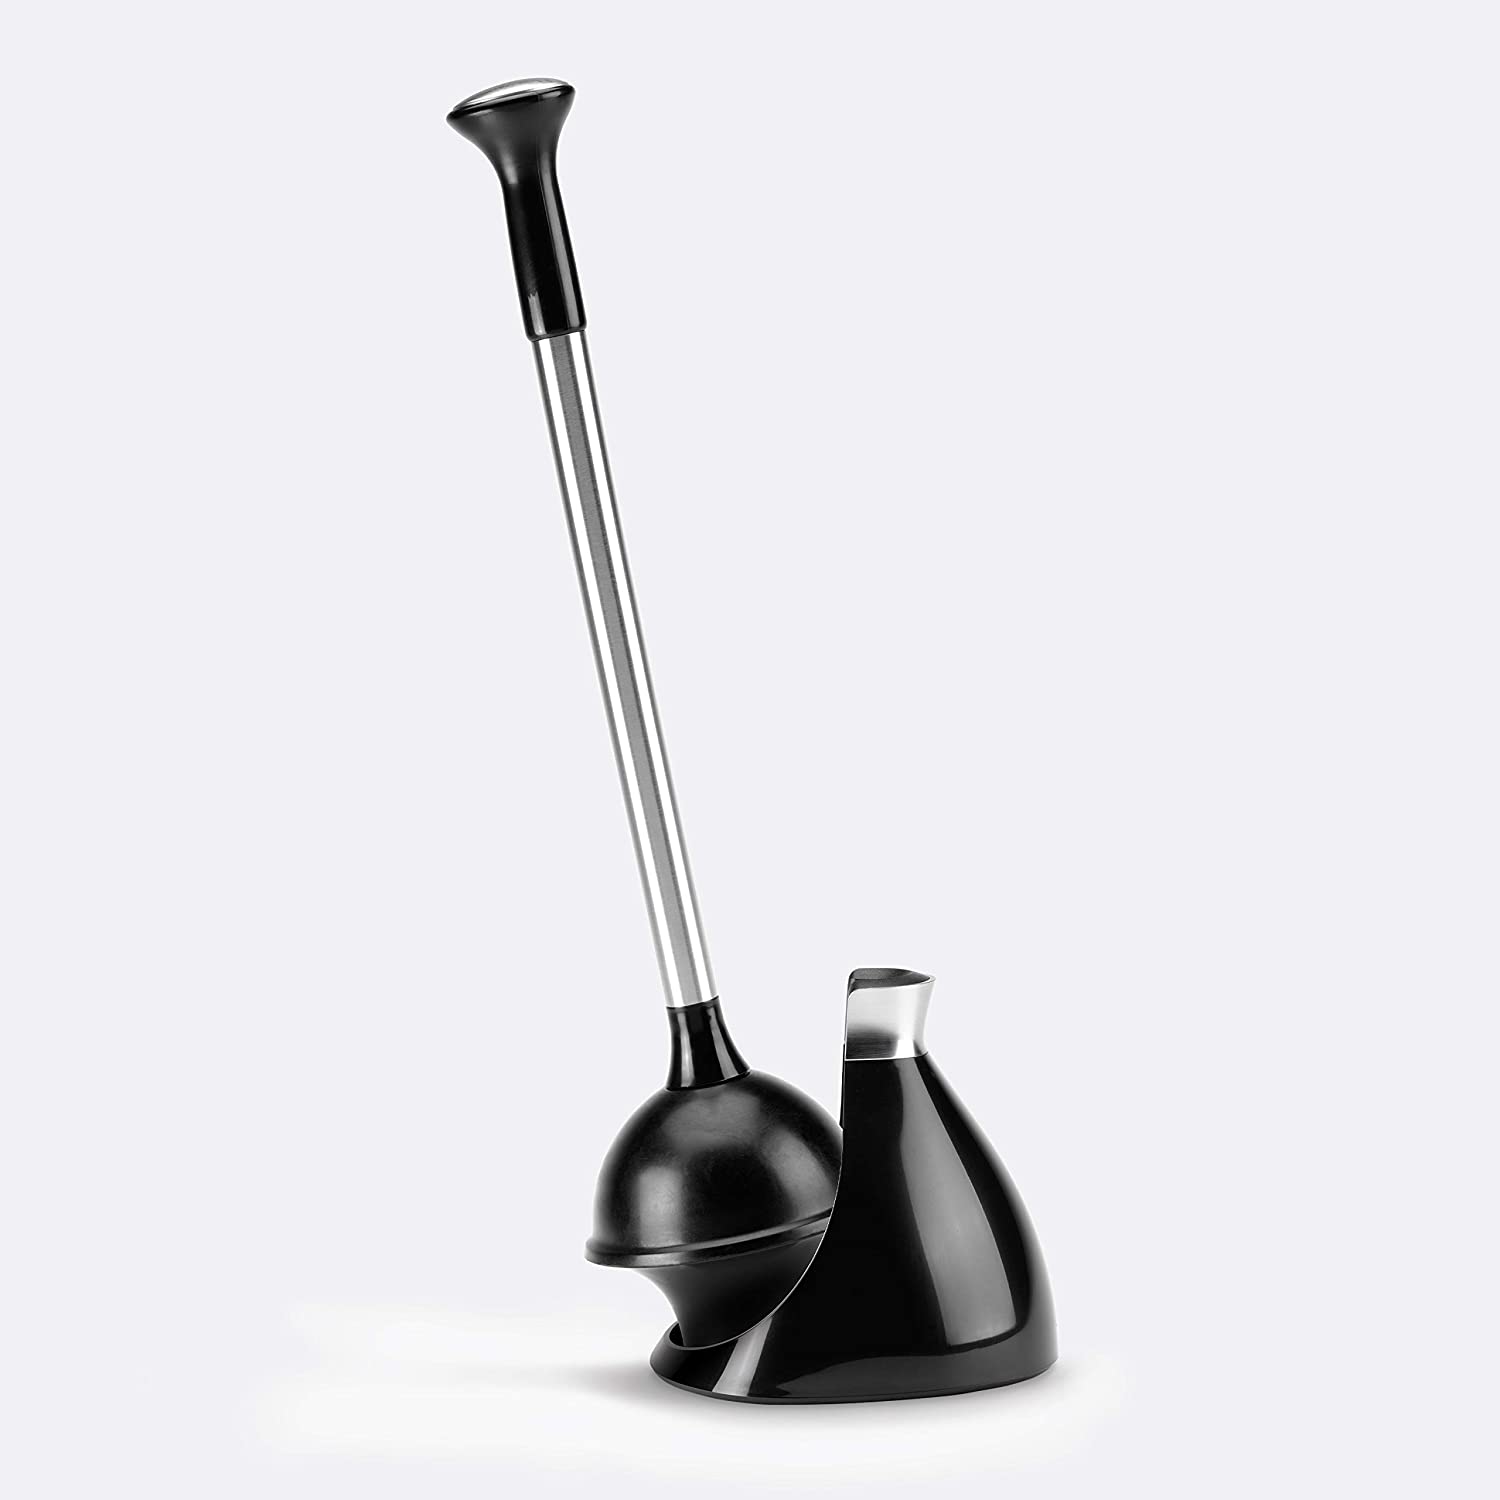  7. The simplehuman Toilet Plunger and Caddy Stainless Steel 